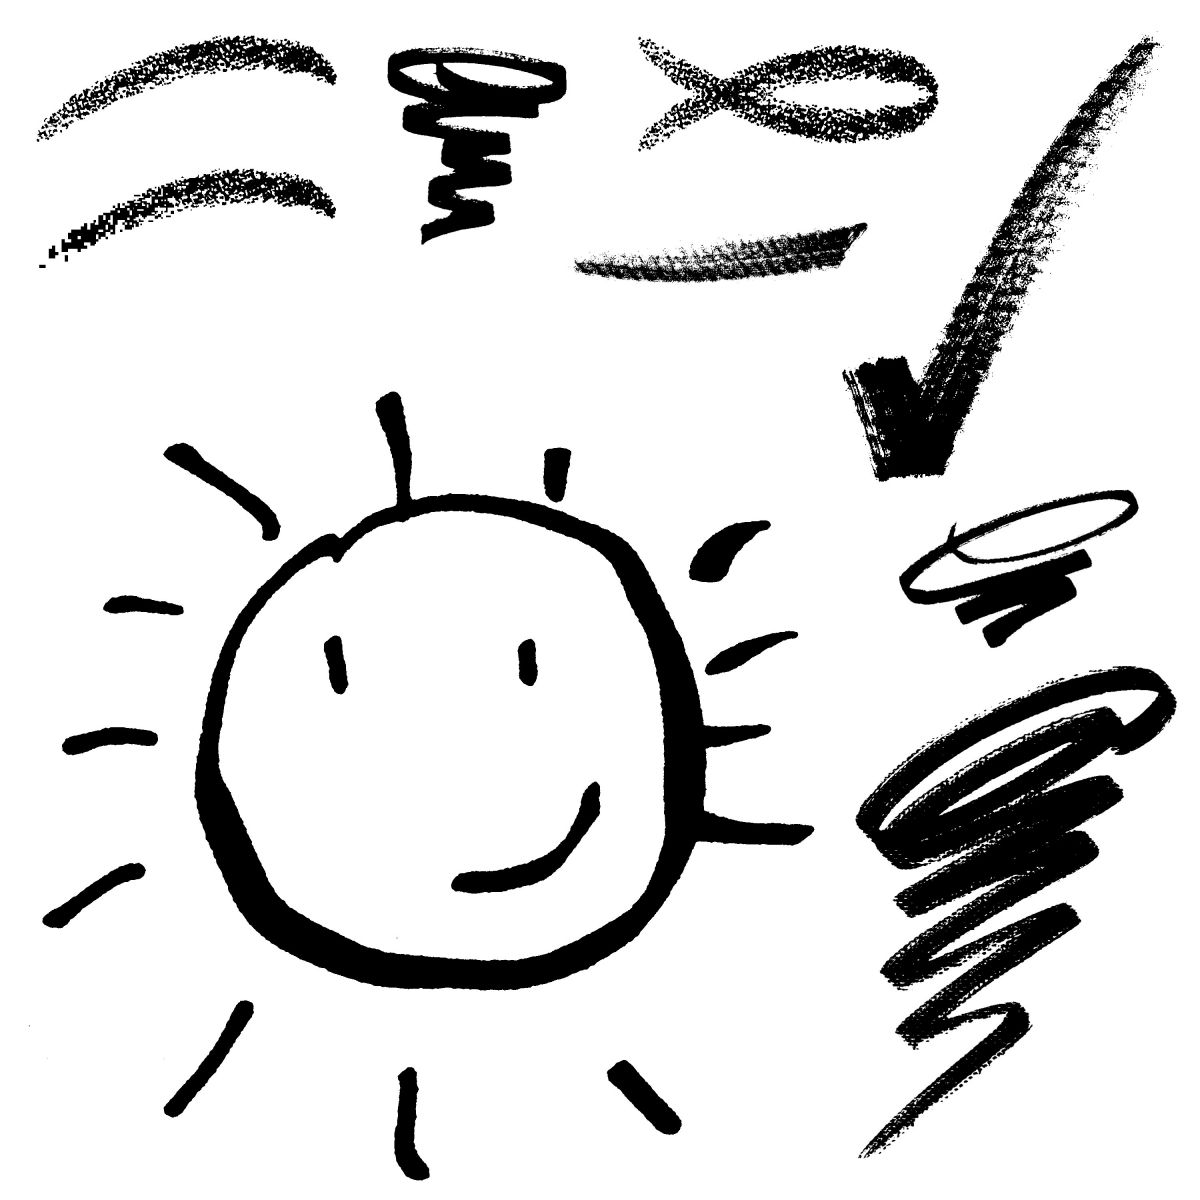 Coloring pages of the sun - Coloring Pages & Pictures - IMAGIXS